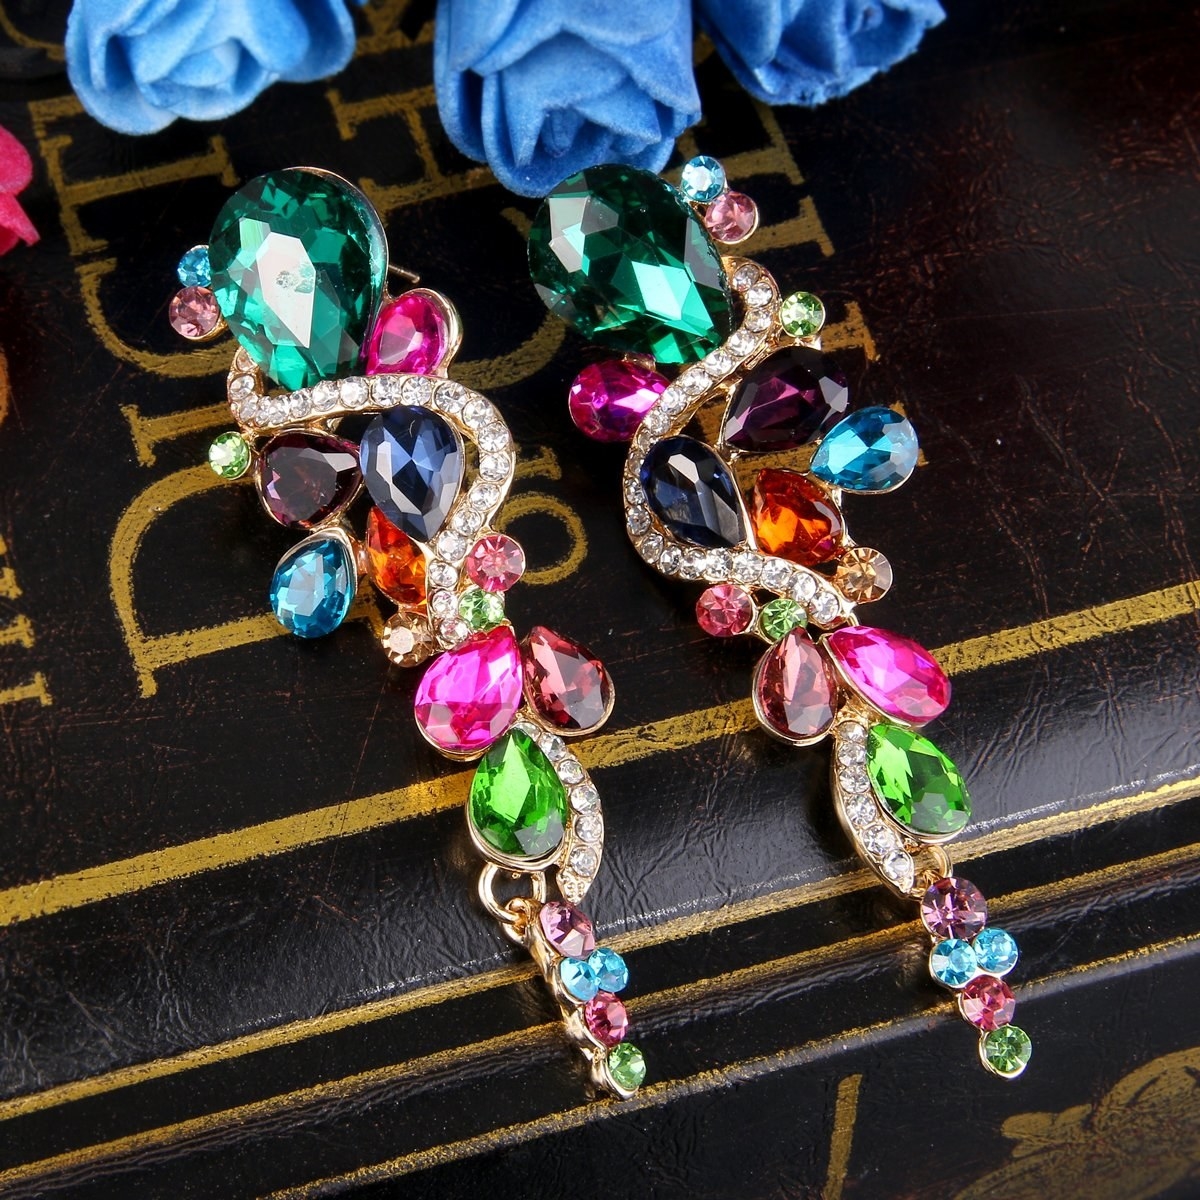 25 Earrings So Amazing, You'll Plan Your Whole Outfit Around Them